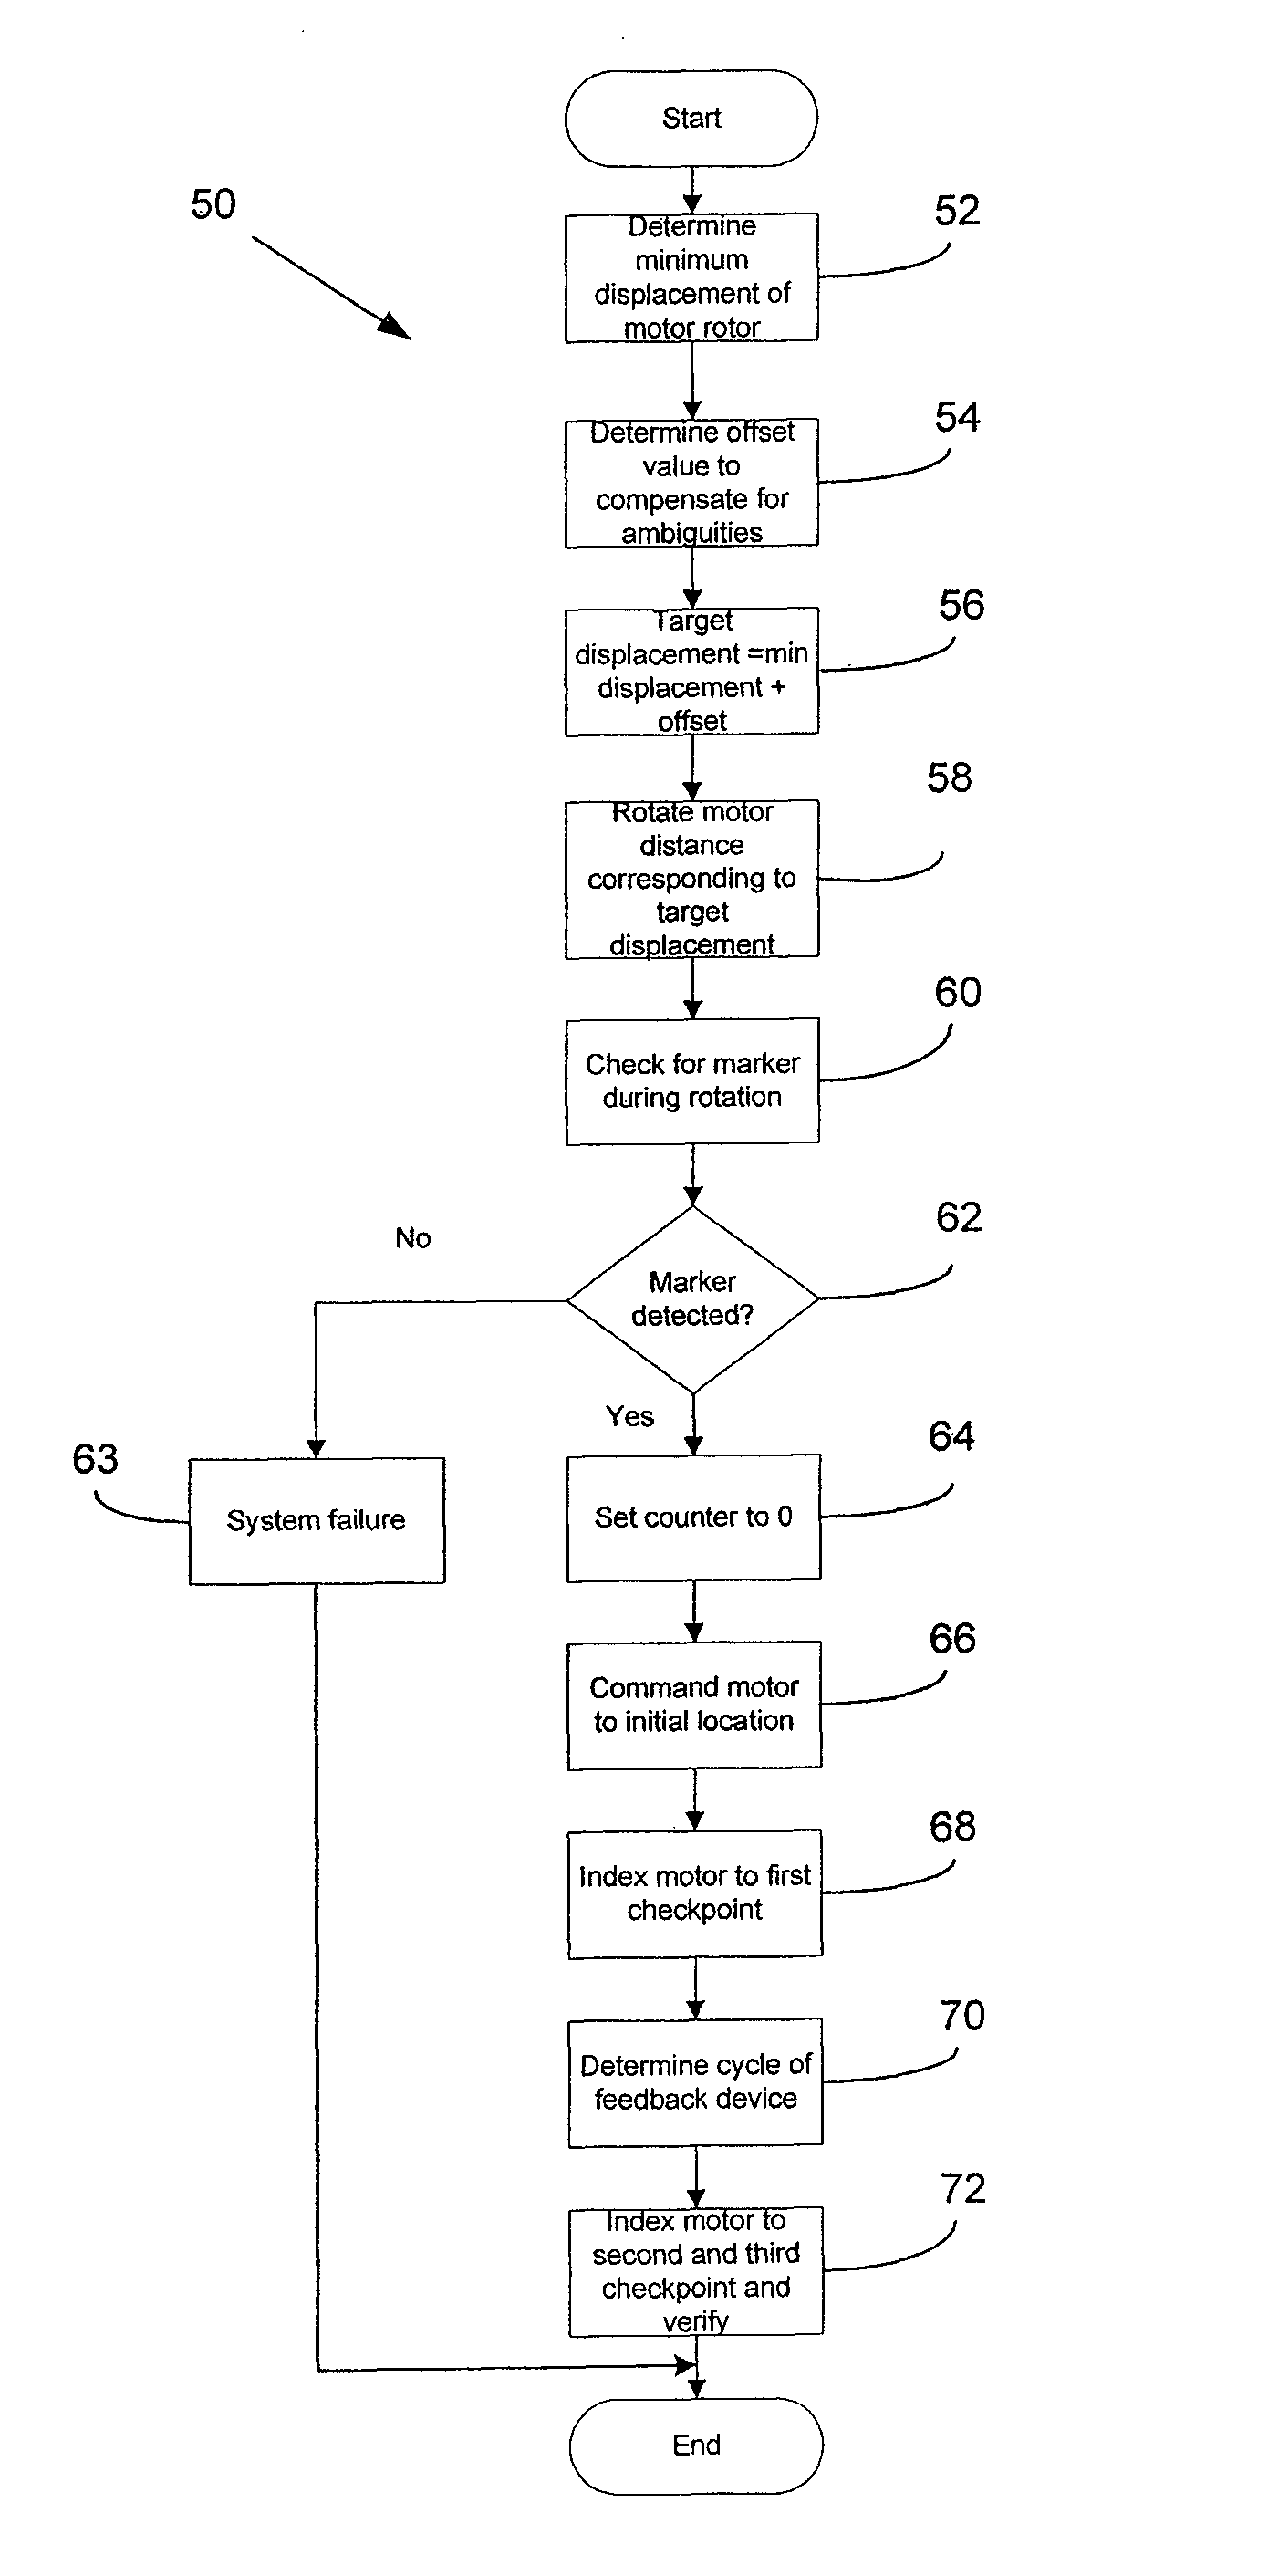 Robust rotational position alignment using a relative position encoder